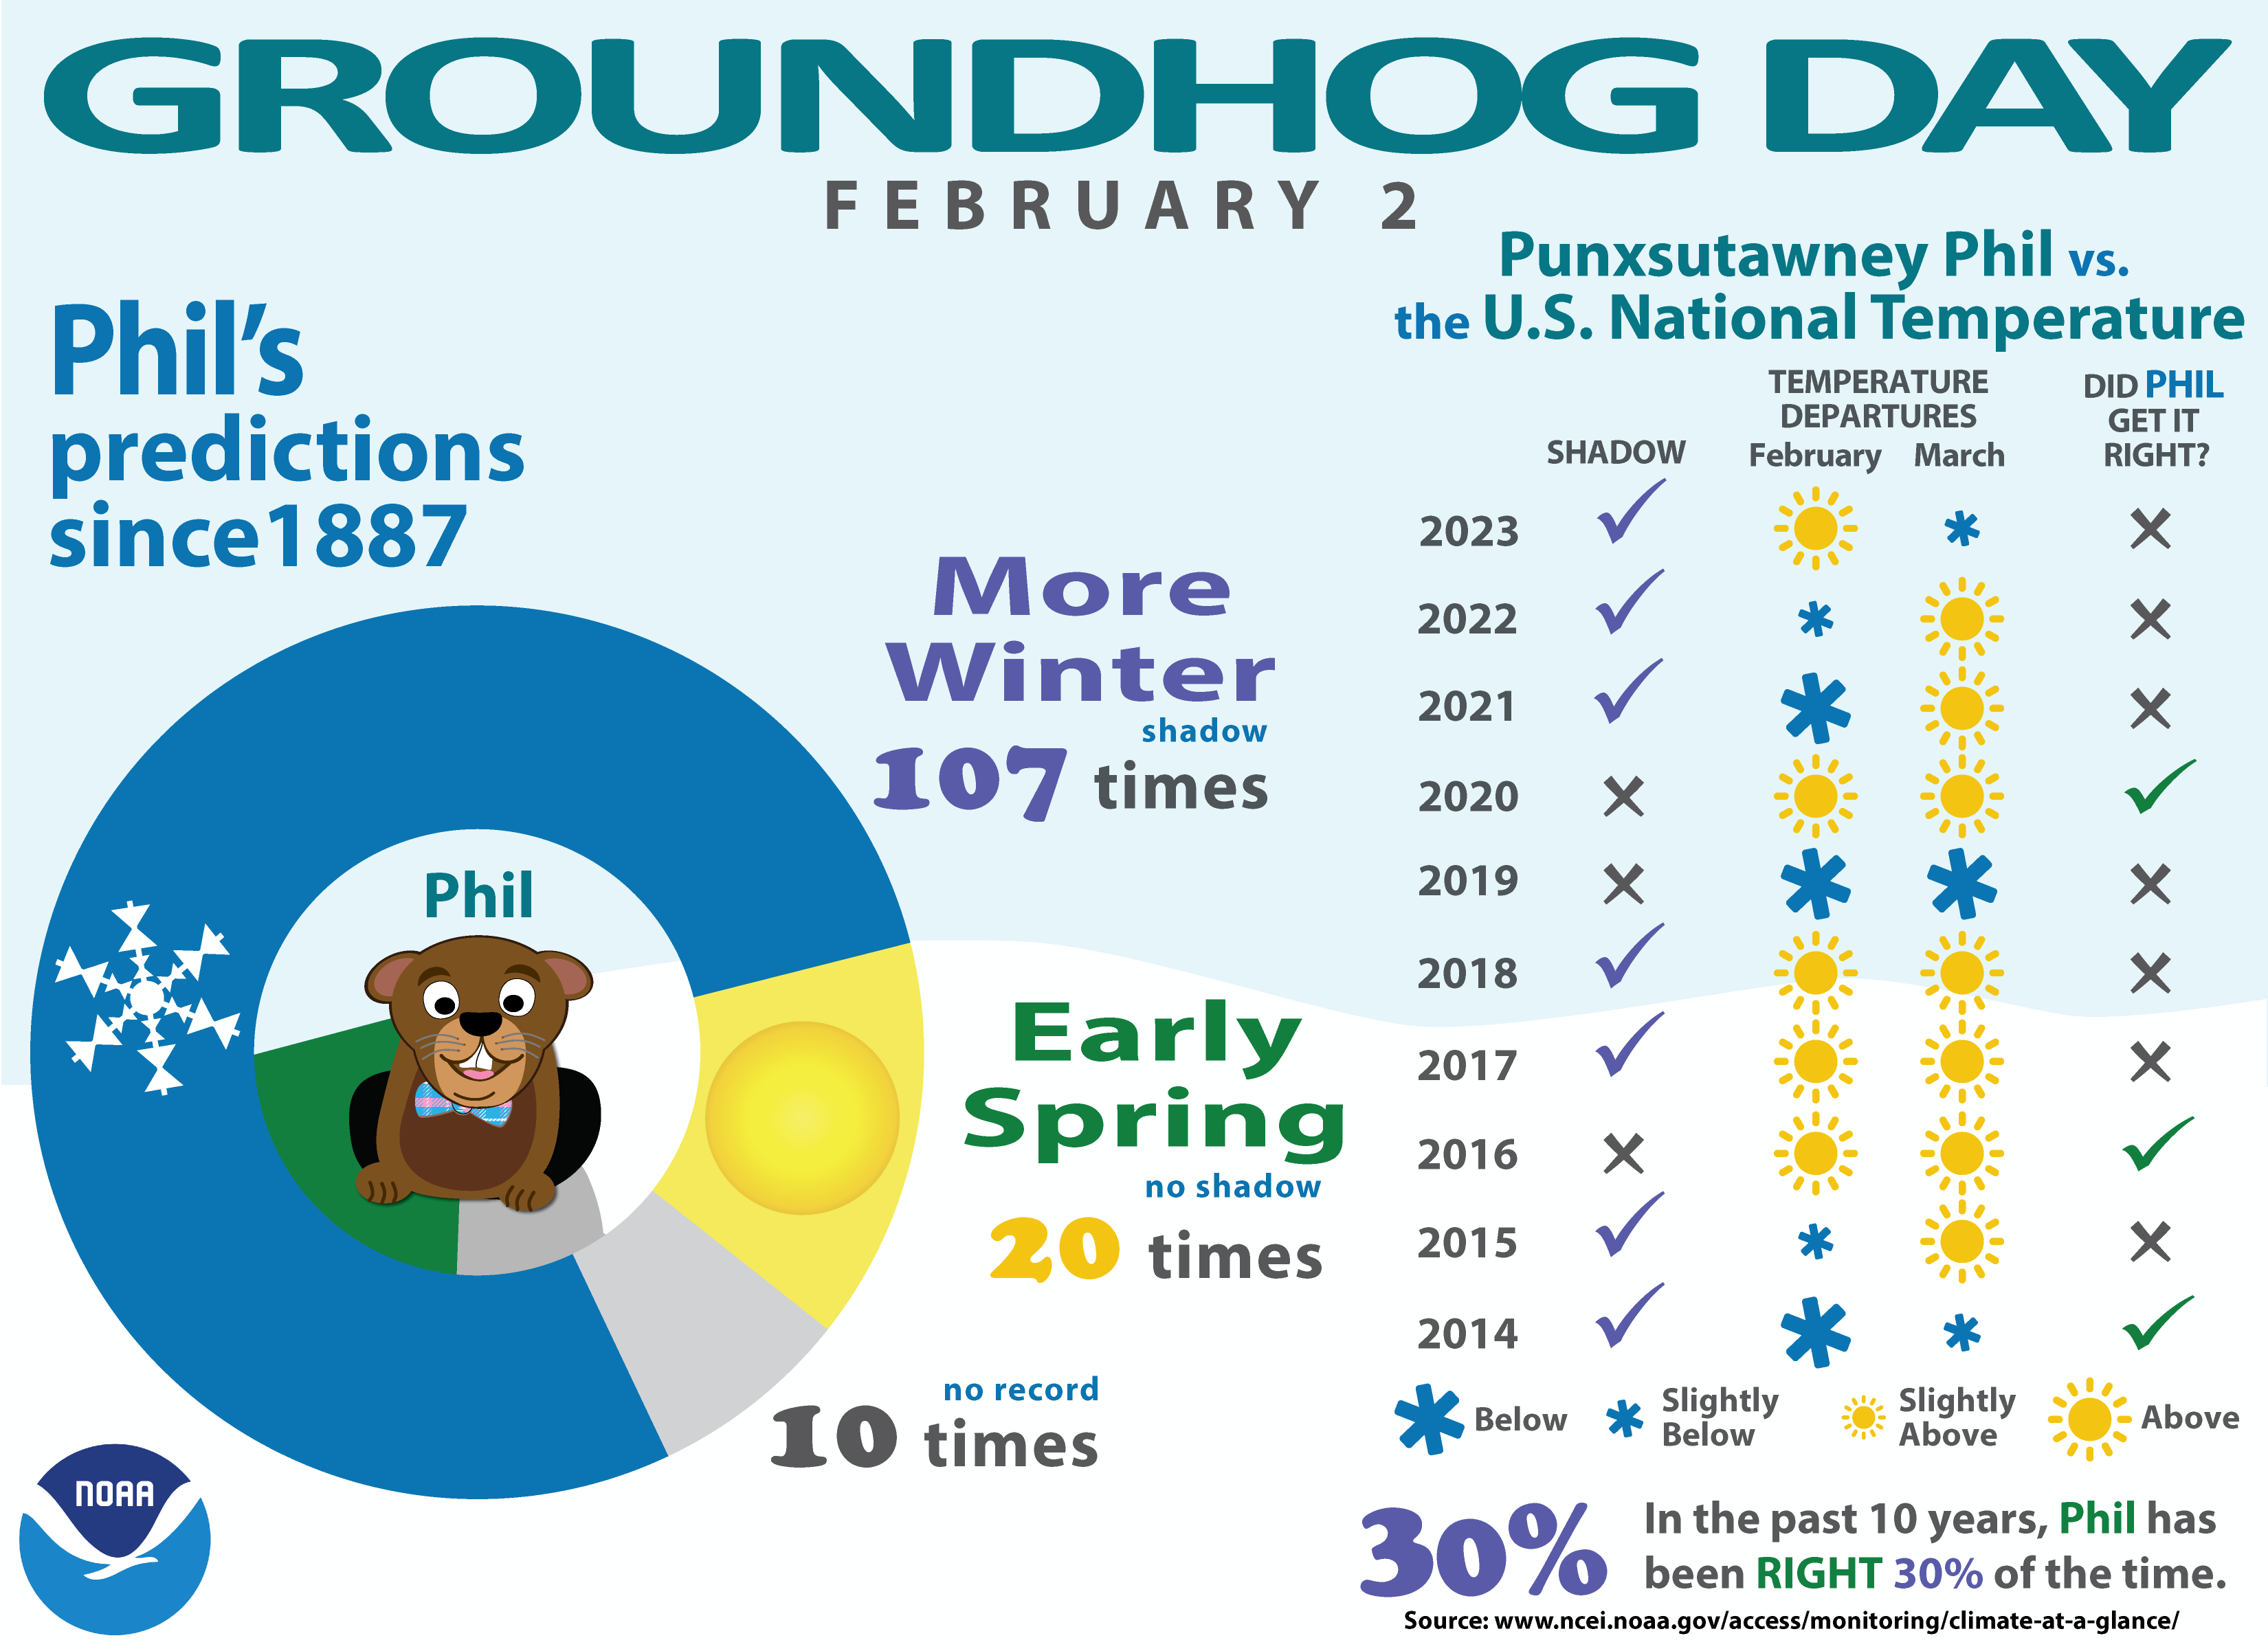 Infographic showing an illustrated groundhog with a table showing the spring predictions made by “Punxsutawney Phil” versus U.S. temperature departures from average from the NOAA U.S. Climate report from 2013-2023.